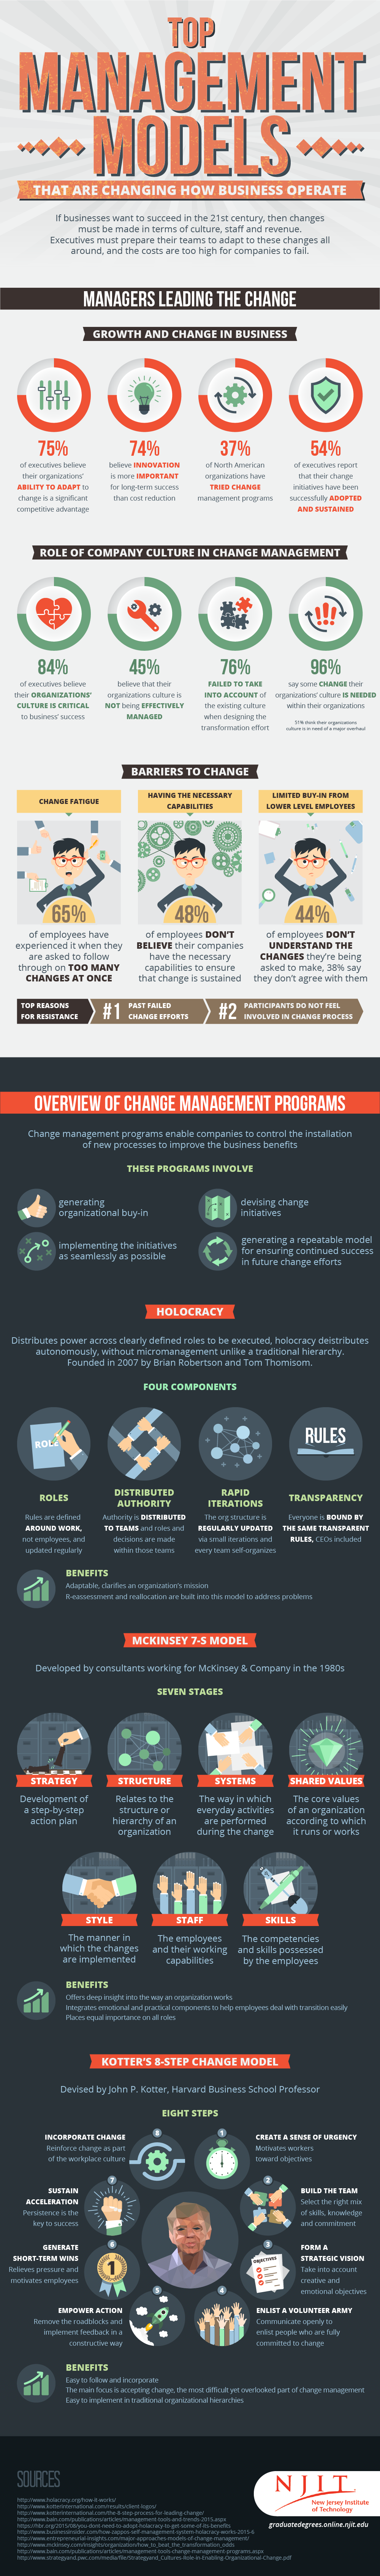 Effective Change Management with Top Business Management Models - Infographic